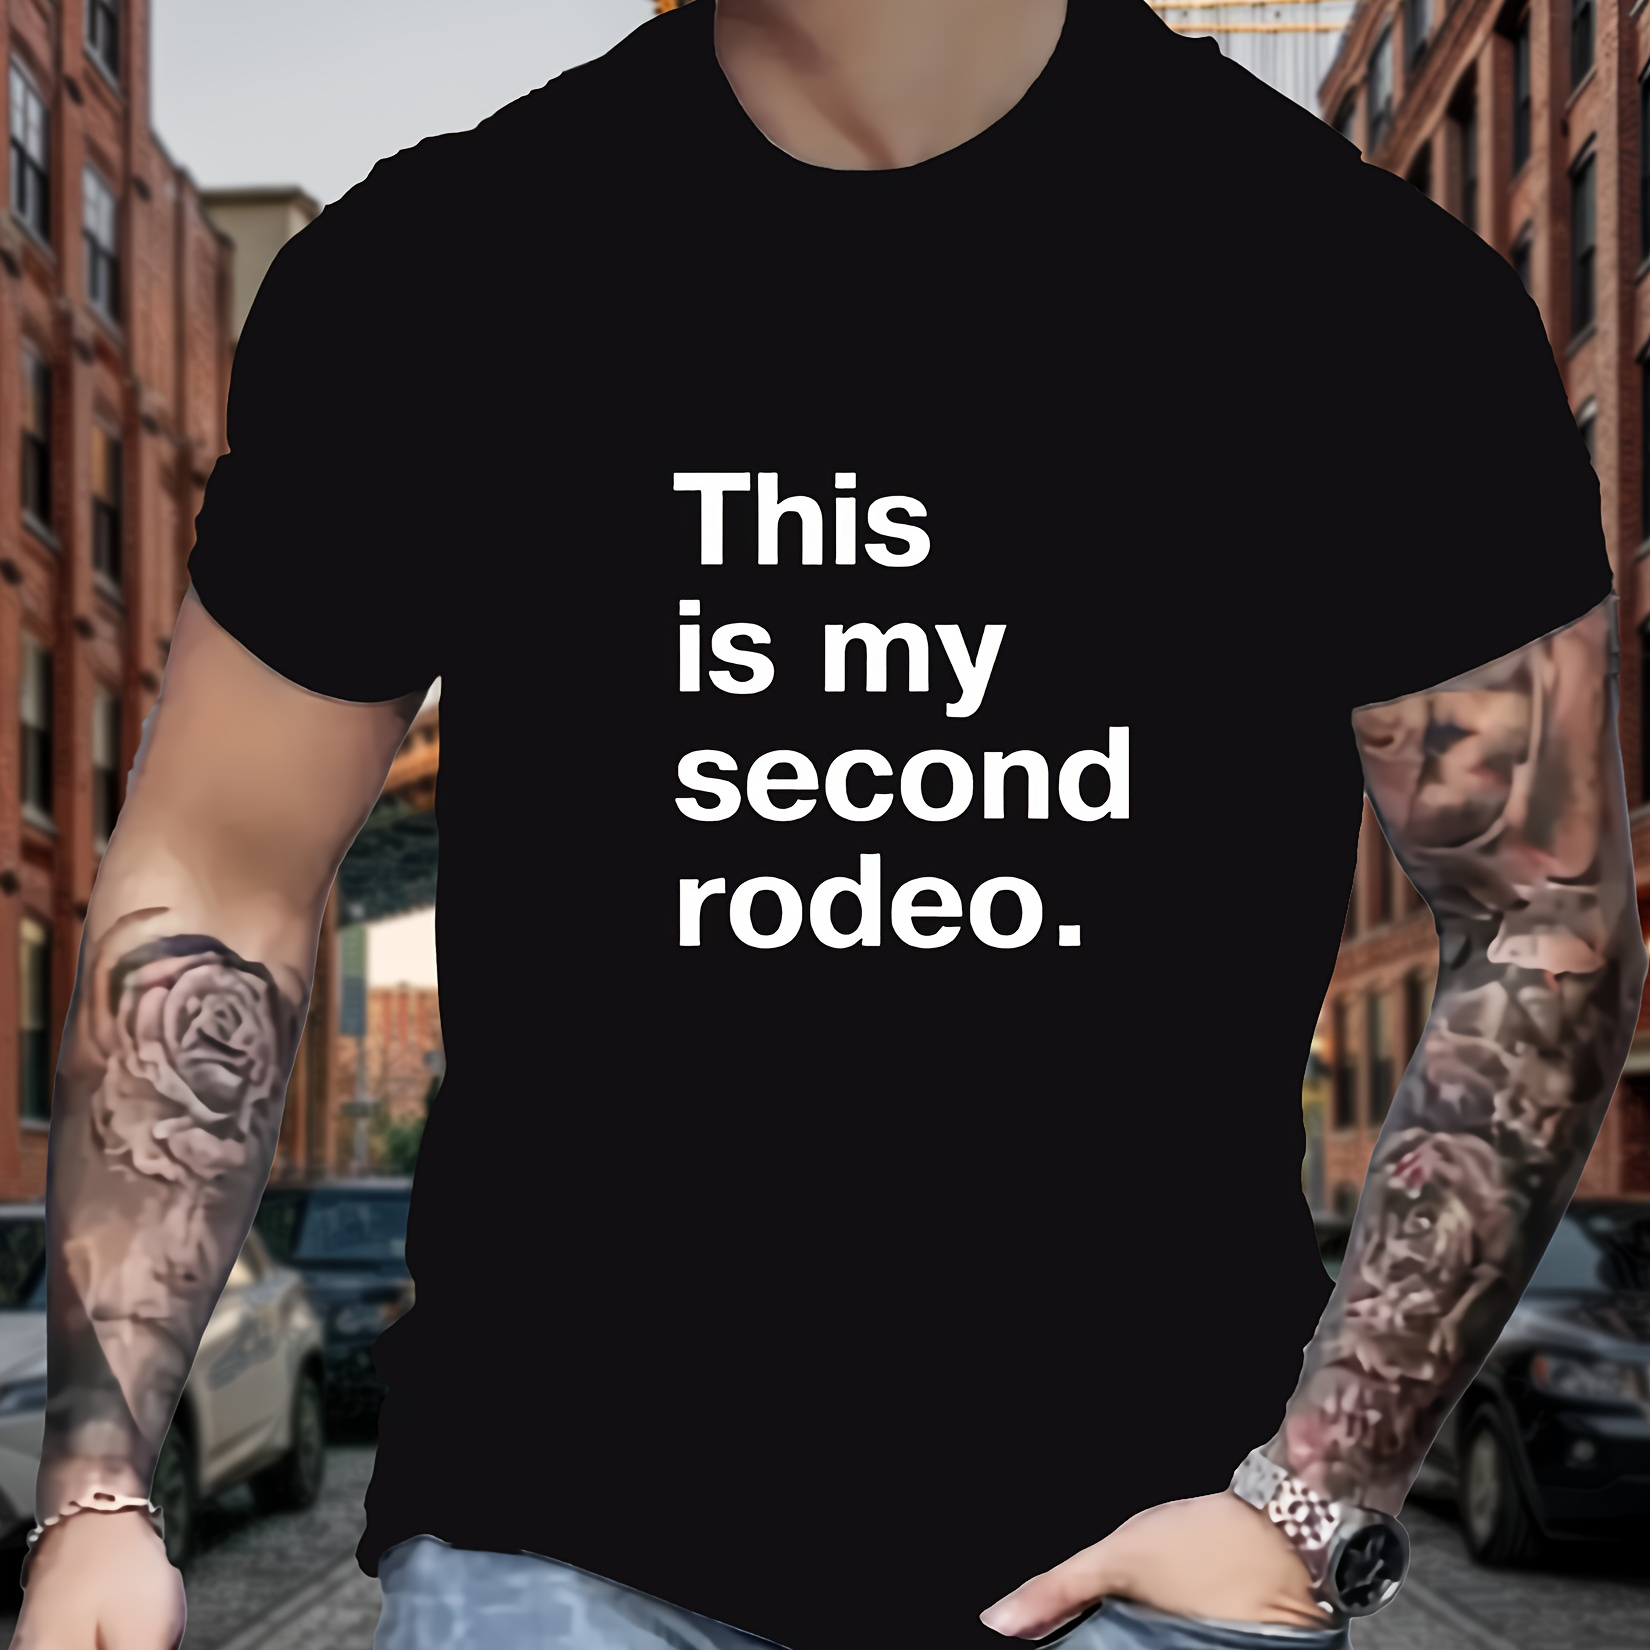 

' This Is My Second Rodeo ' Print Men's Crew Neck Short Sleeve T-shirt, Summer Casual Comfy Top For Outdoor Fitness & Daily Wear